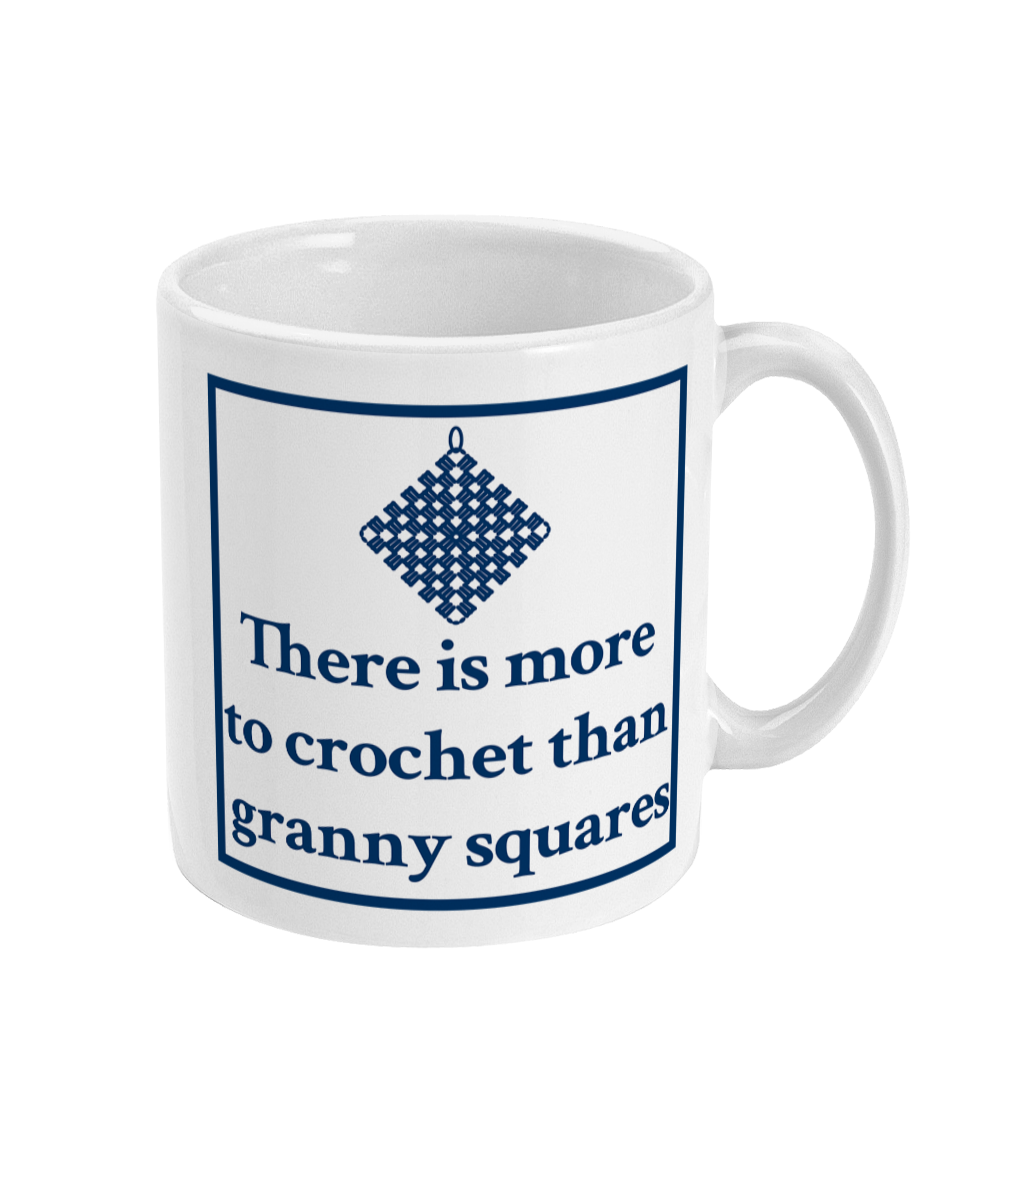 mug with an image of a crochet square with the text there is more to crochet than granny squares